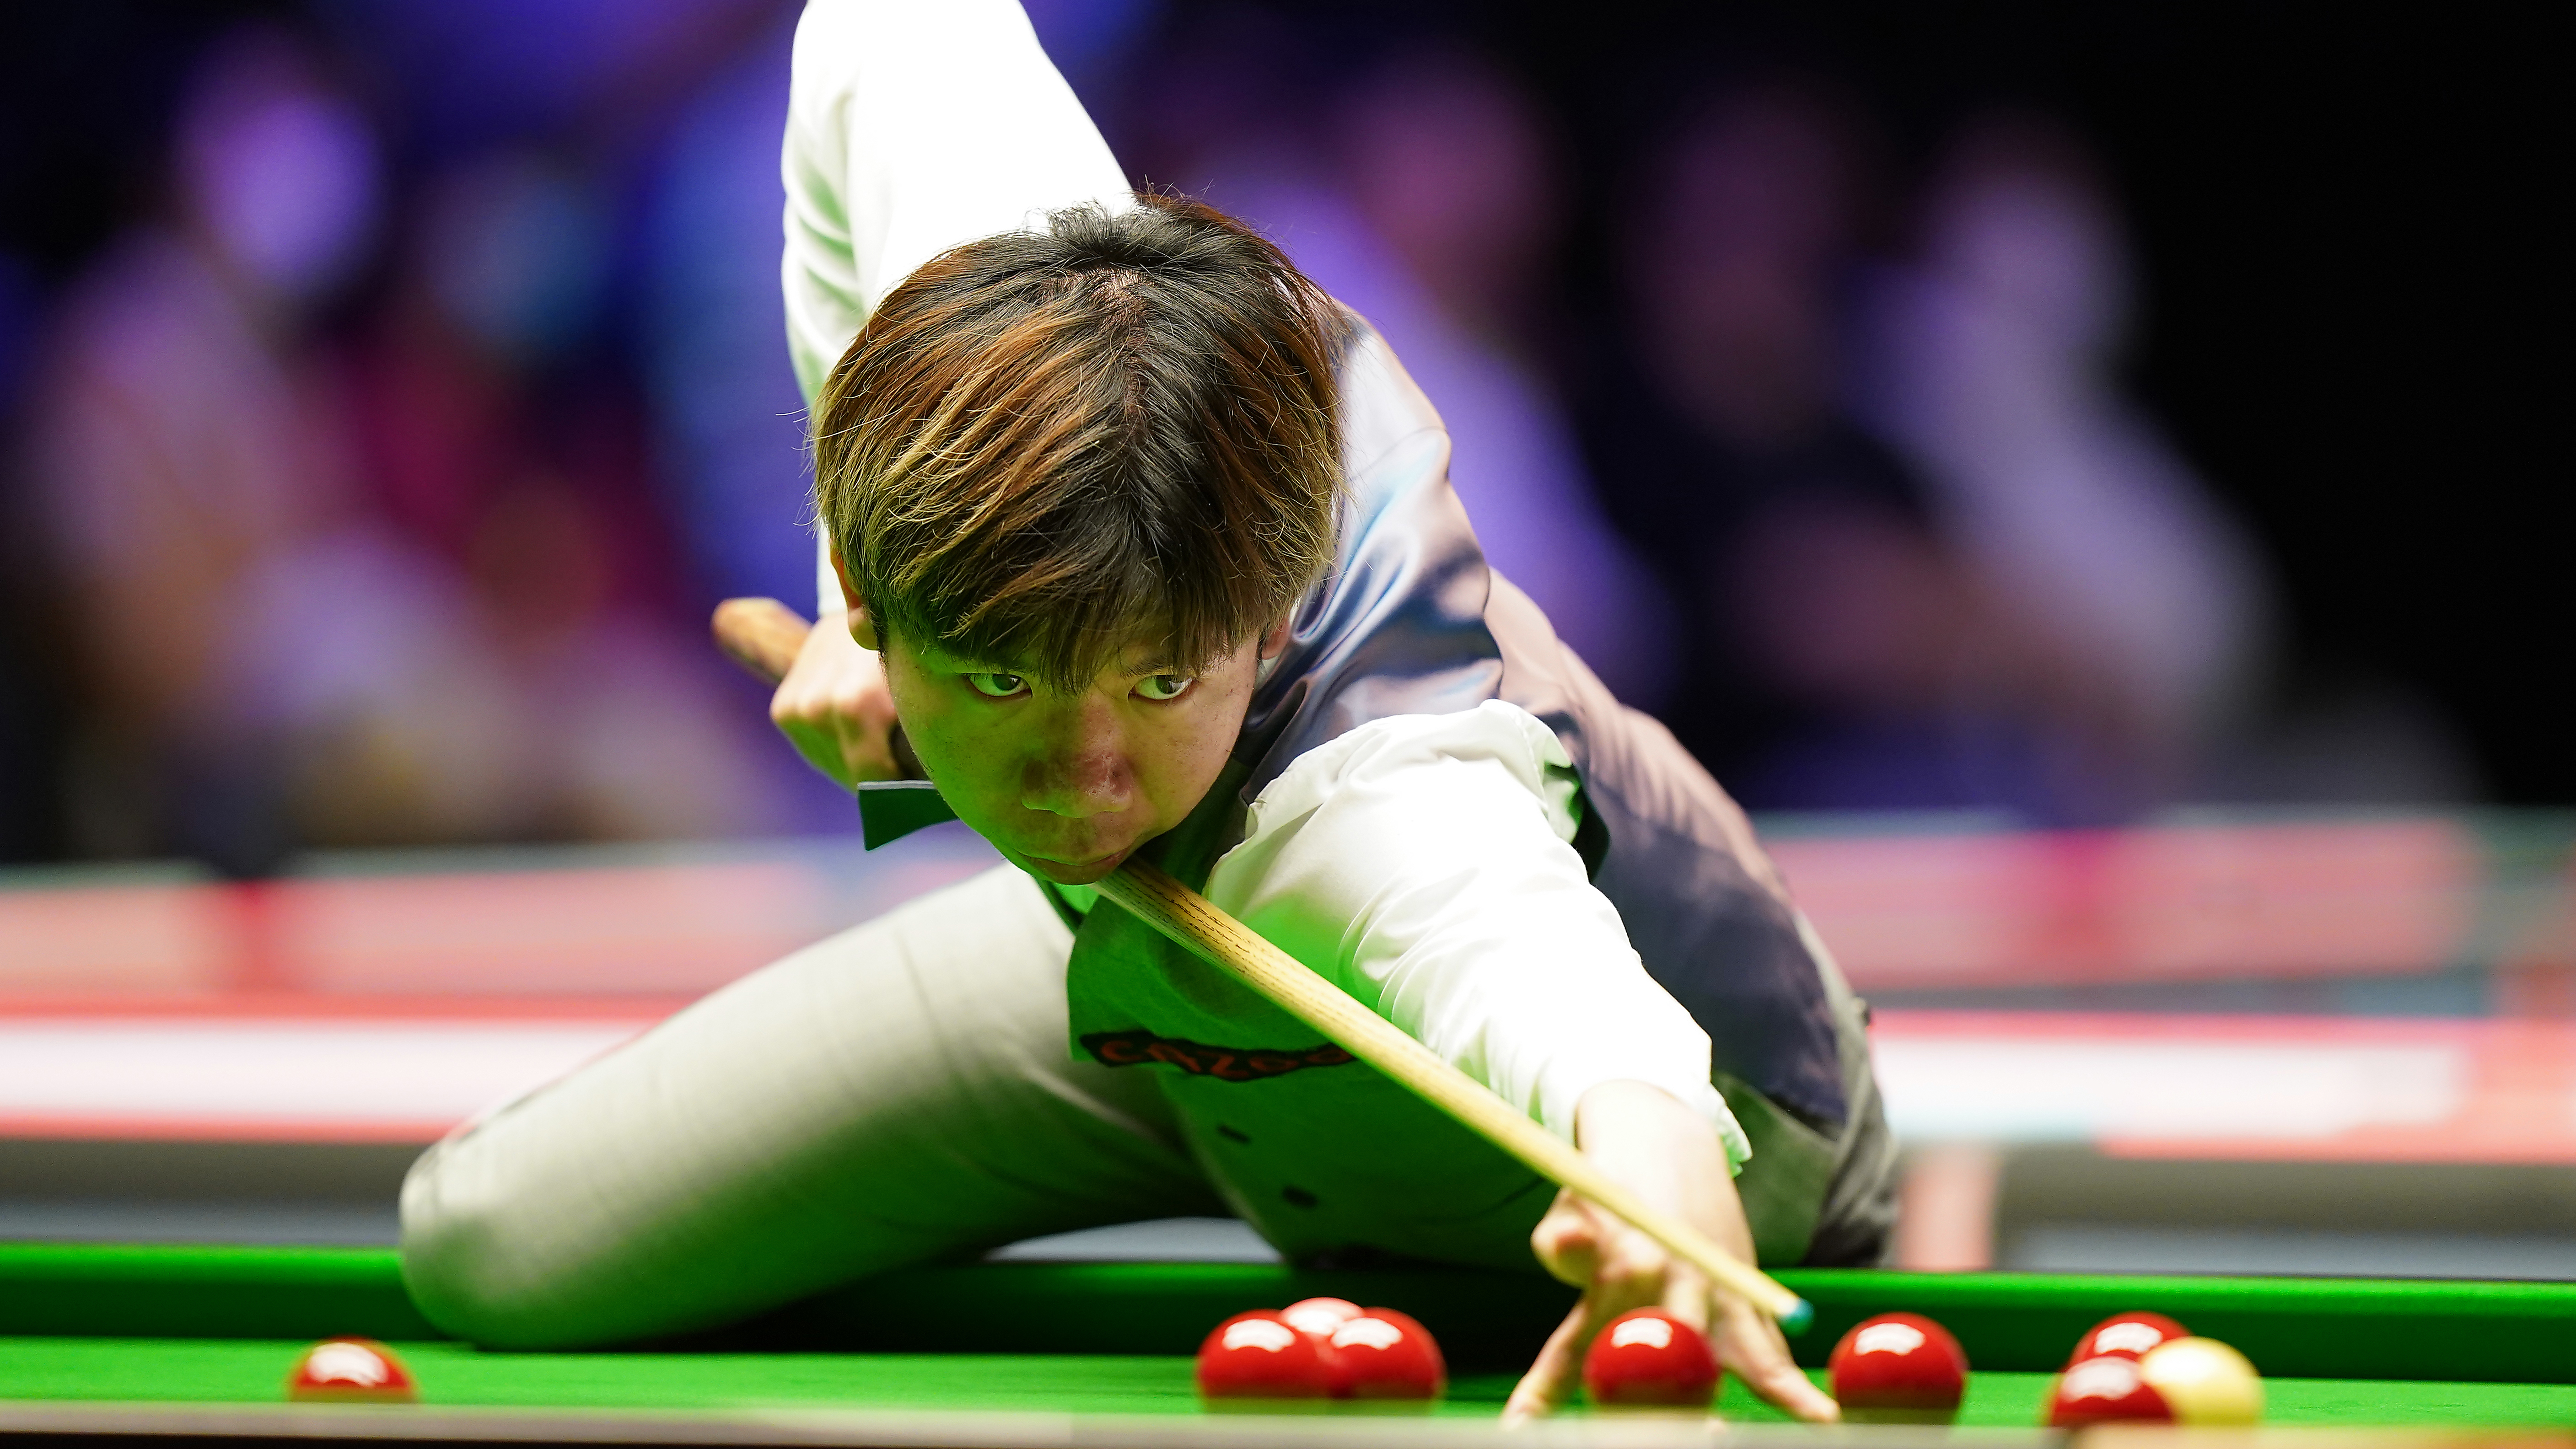 Snooker 2022/2023 season five to follow from Neal Foulds and selected media